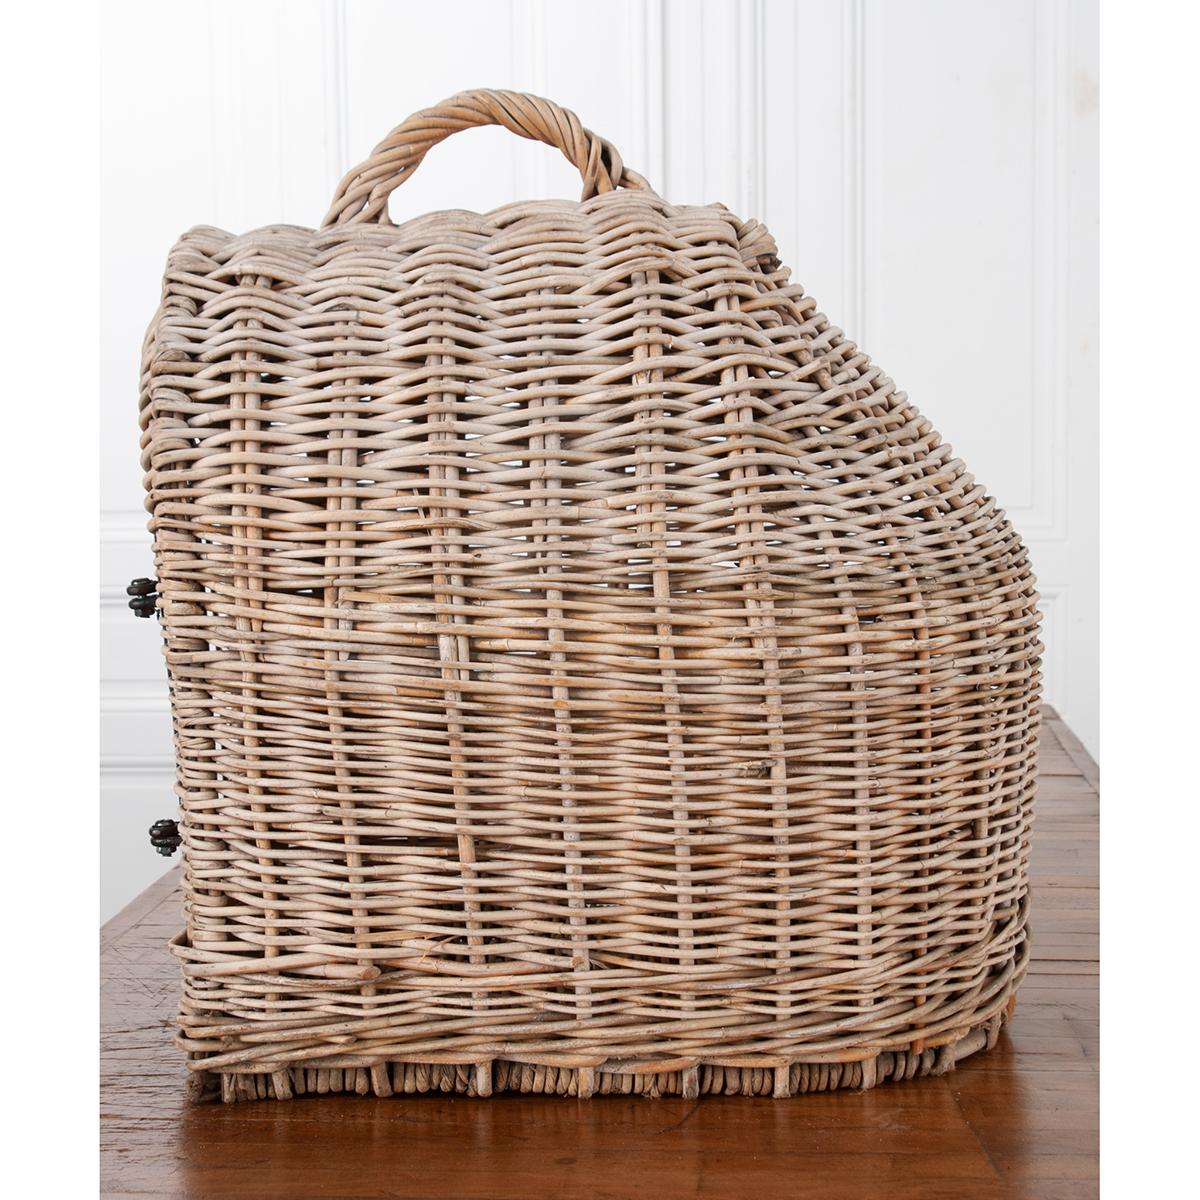 Rustic English Wicker Animal Carrier